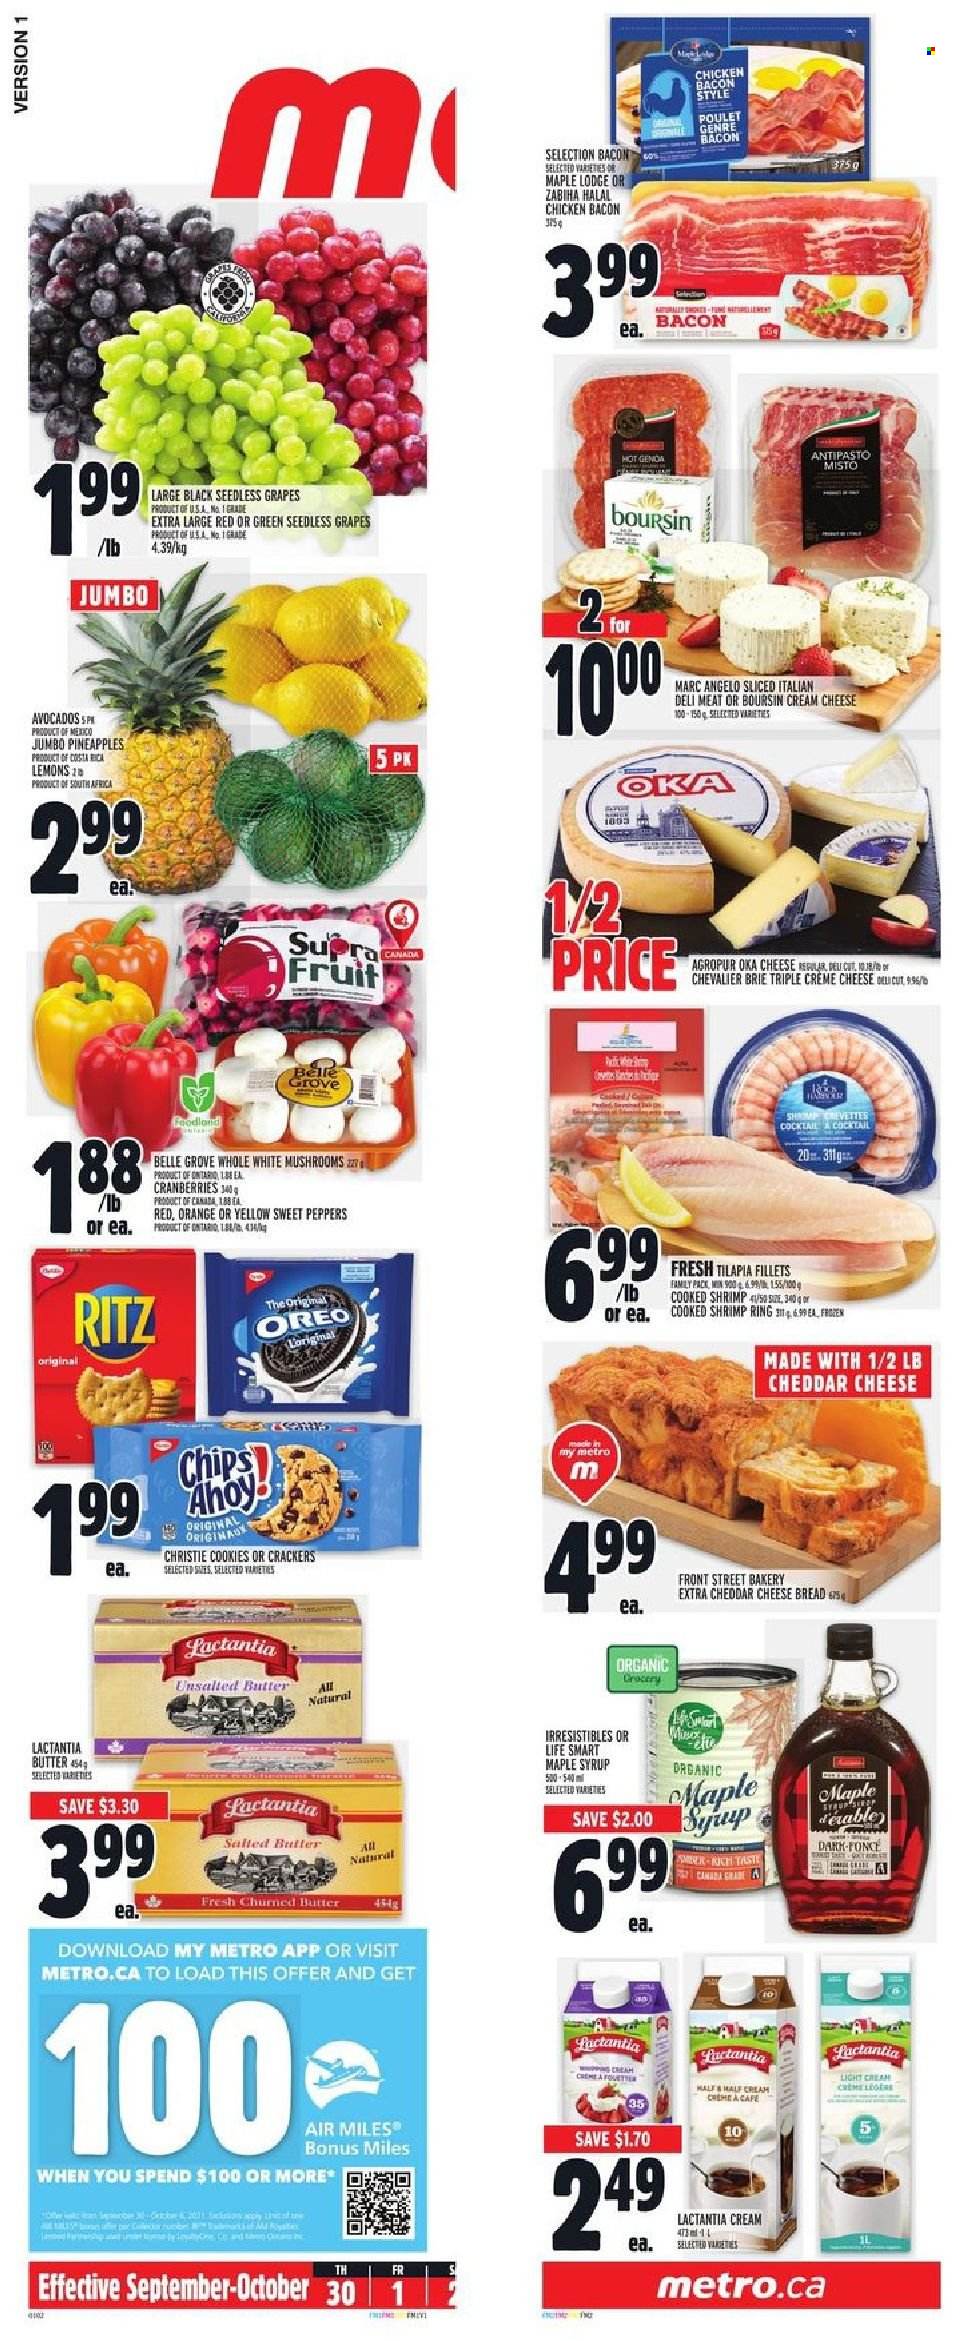 thumbnail - Metro Flyer - September 30, 2021 - October 06, 2021 - Sales products - mushrooms, bread, sweet peppers, peppers, avocado, grapes, seedless grapes, pineapple, lemons, tilapia, shrimps, bacon, cream cheese, cheddar, cheese, brie, cookies, crackers, RITZ, cranberries, maple syrup, syrup, Oreo, oranges. Page 16.